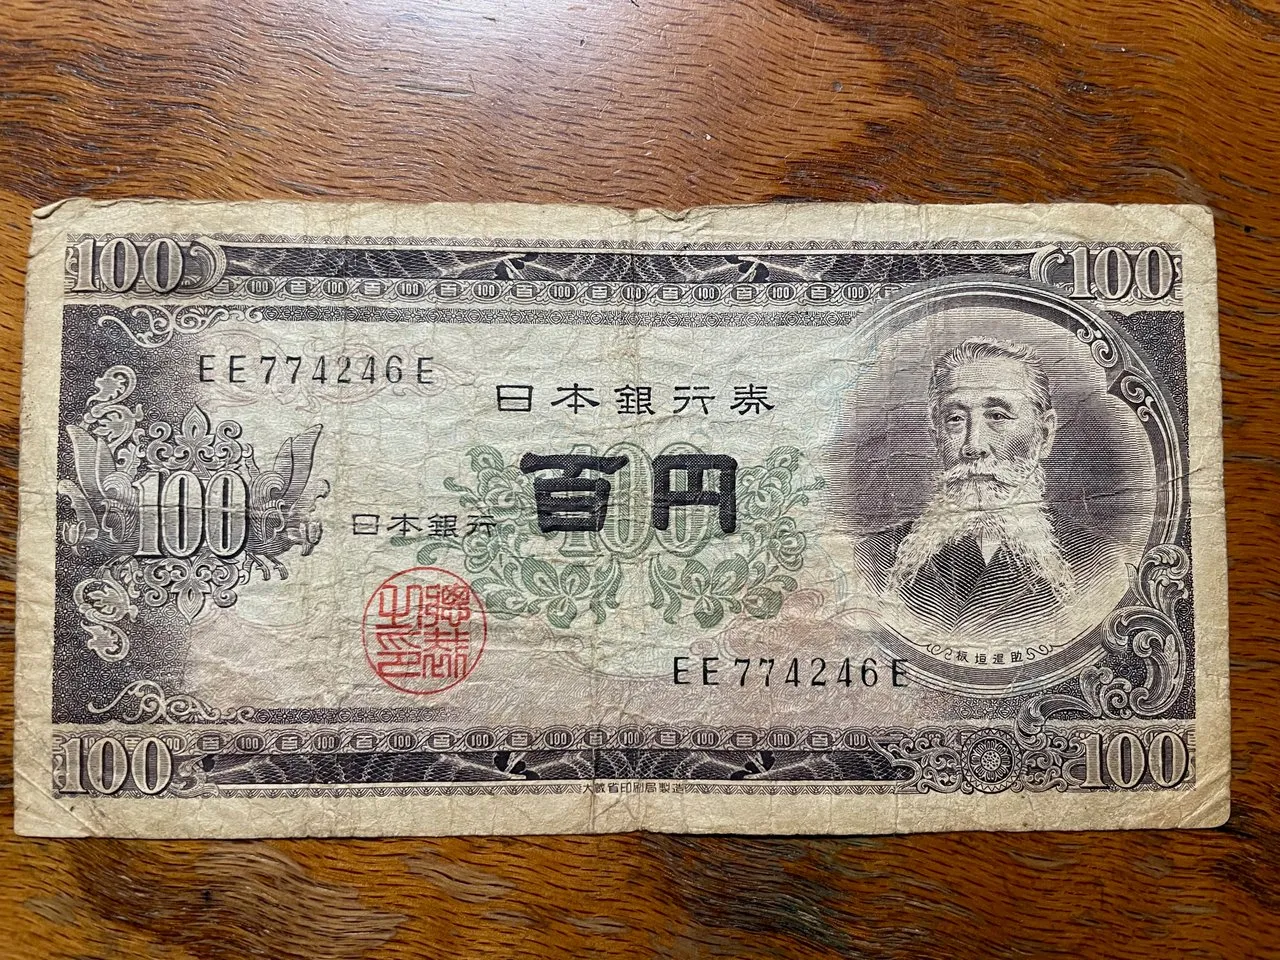 100 Banknote, Featuring a Dude with a Forked-Beard